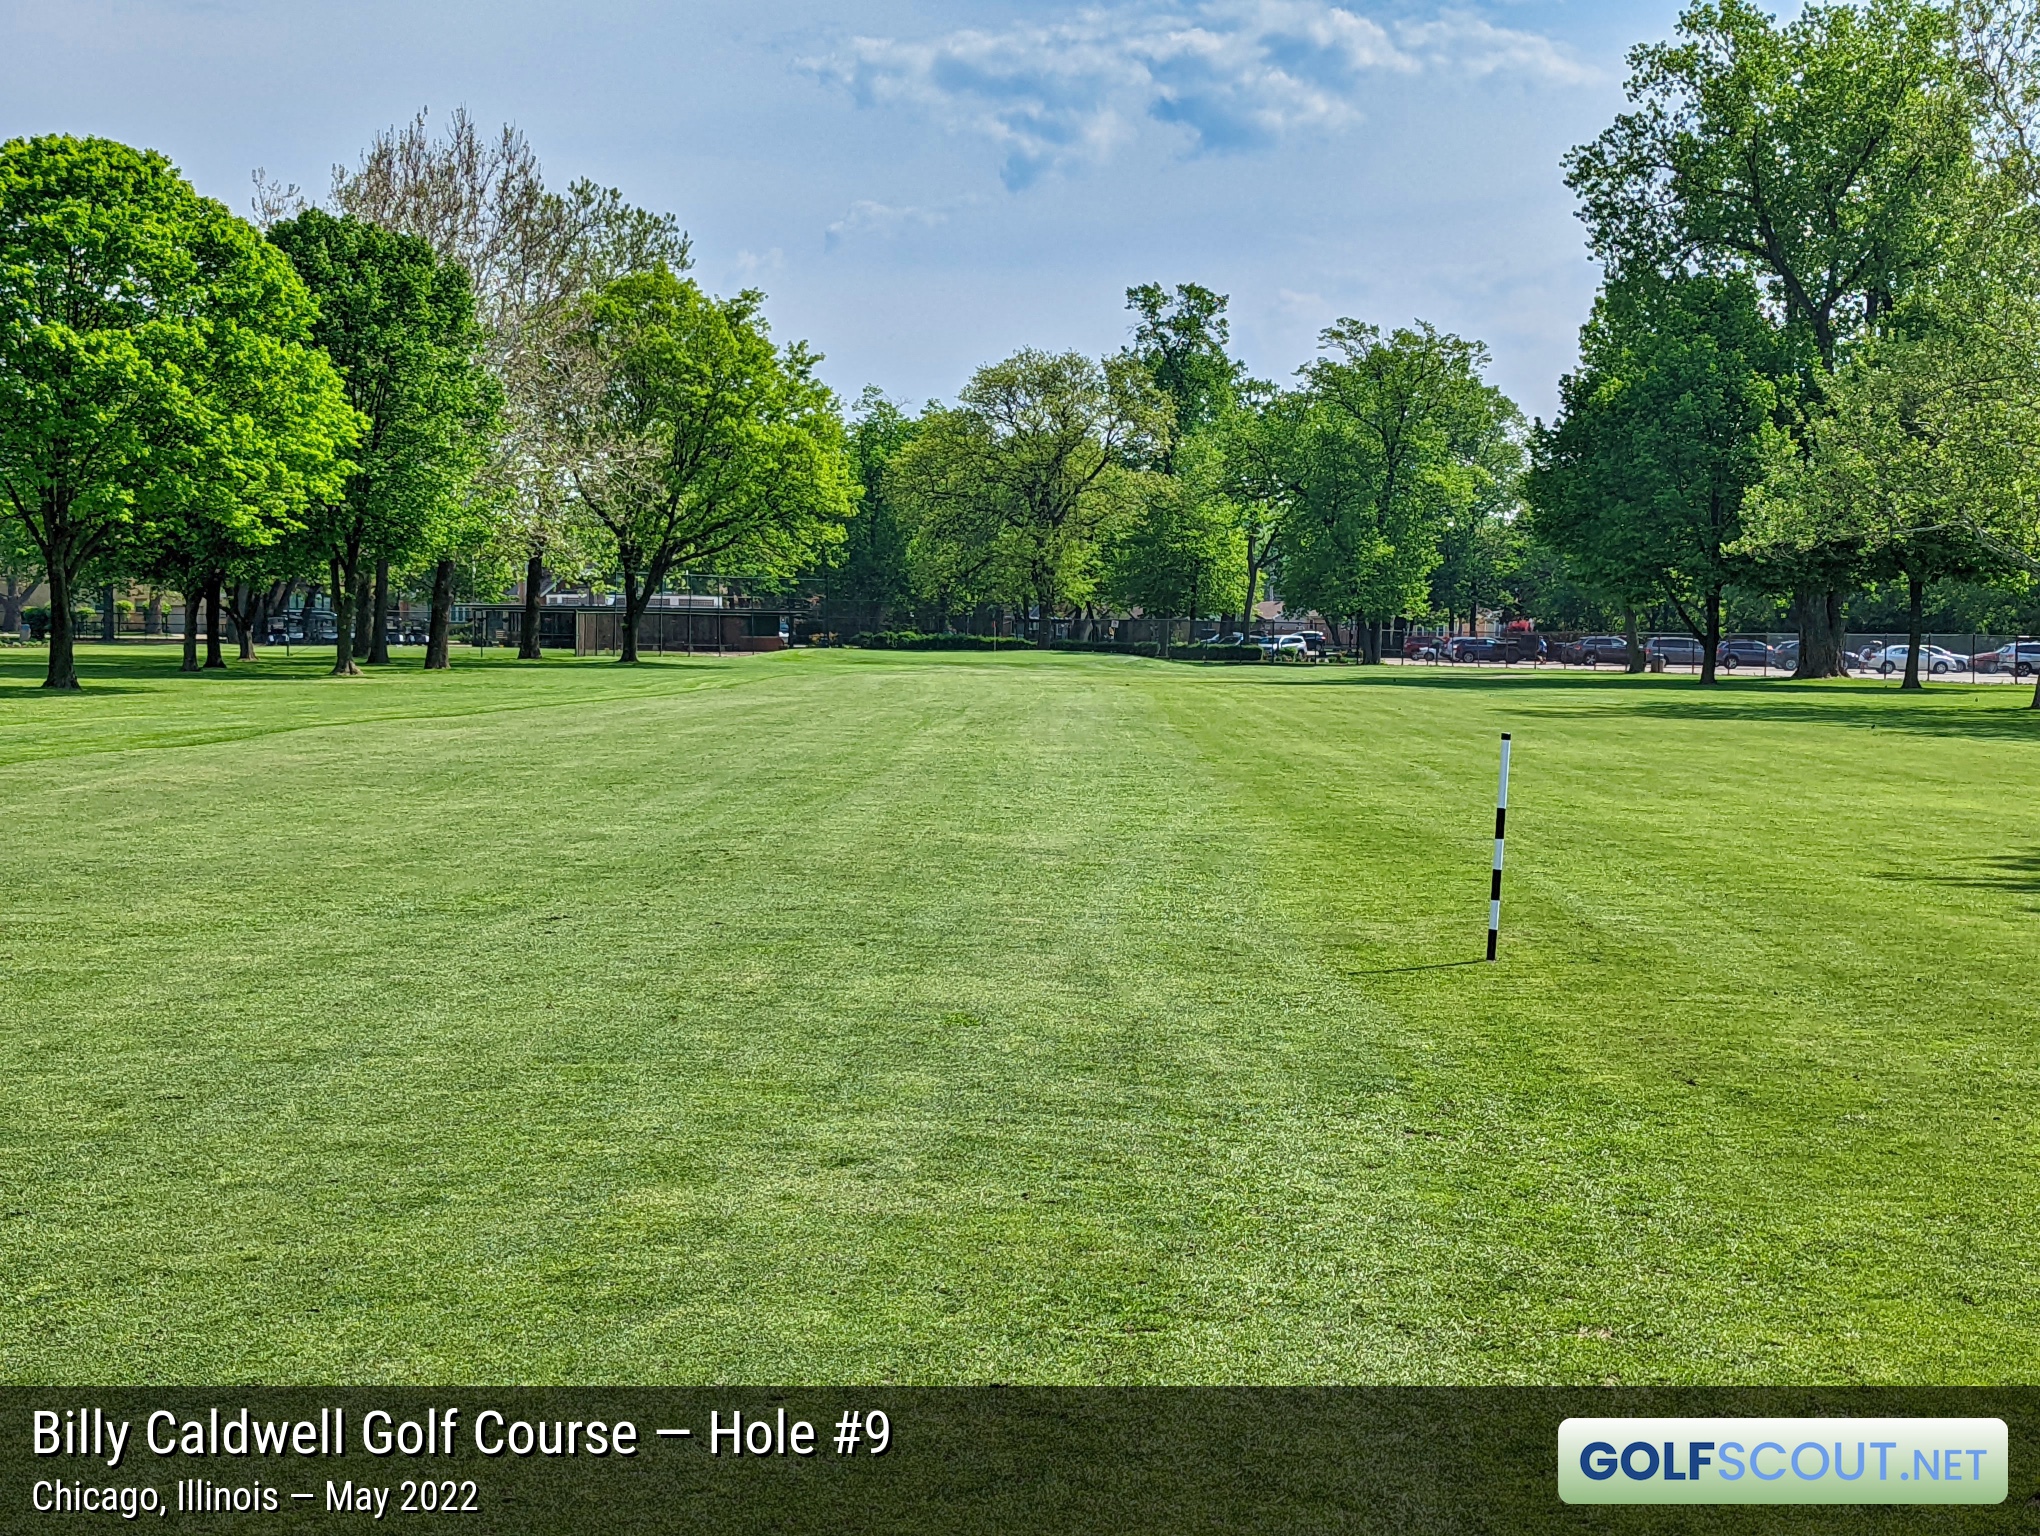 Photo of hole #9 at Billy Caldwell Golf Course in Chicago, Illinois. 